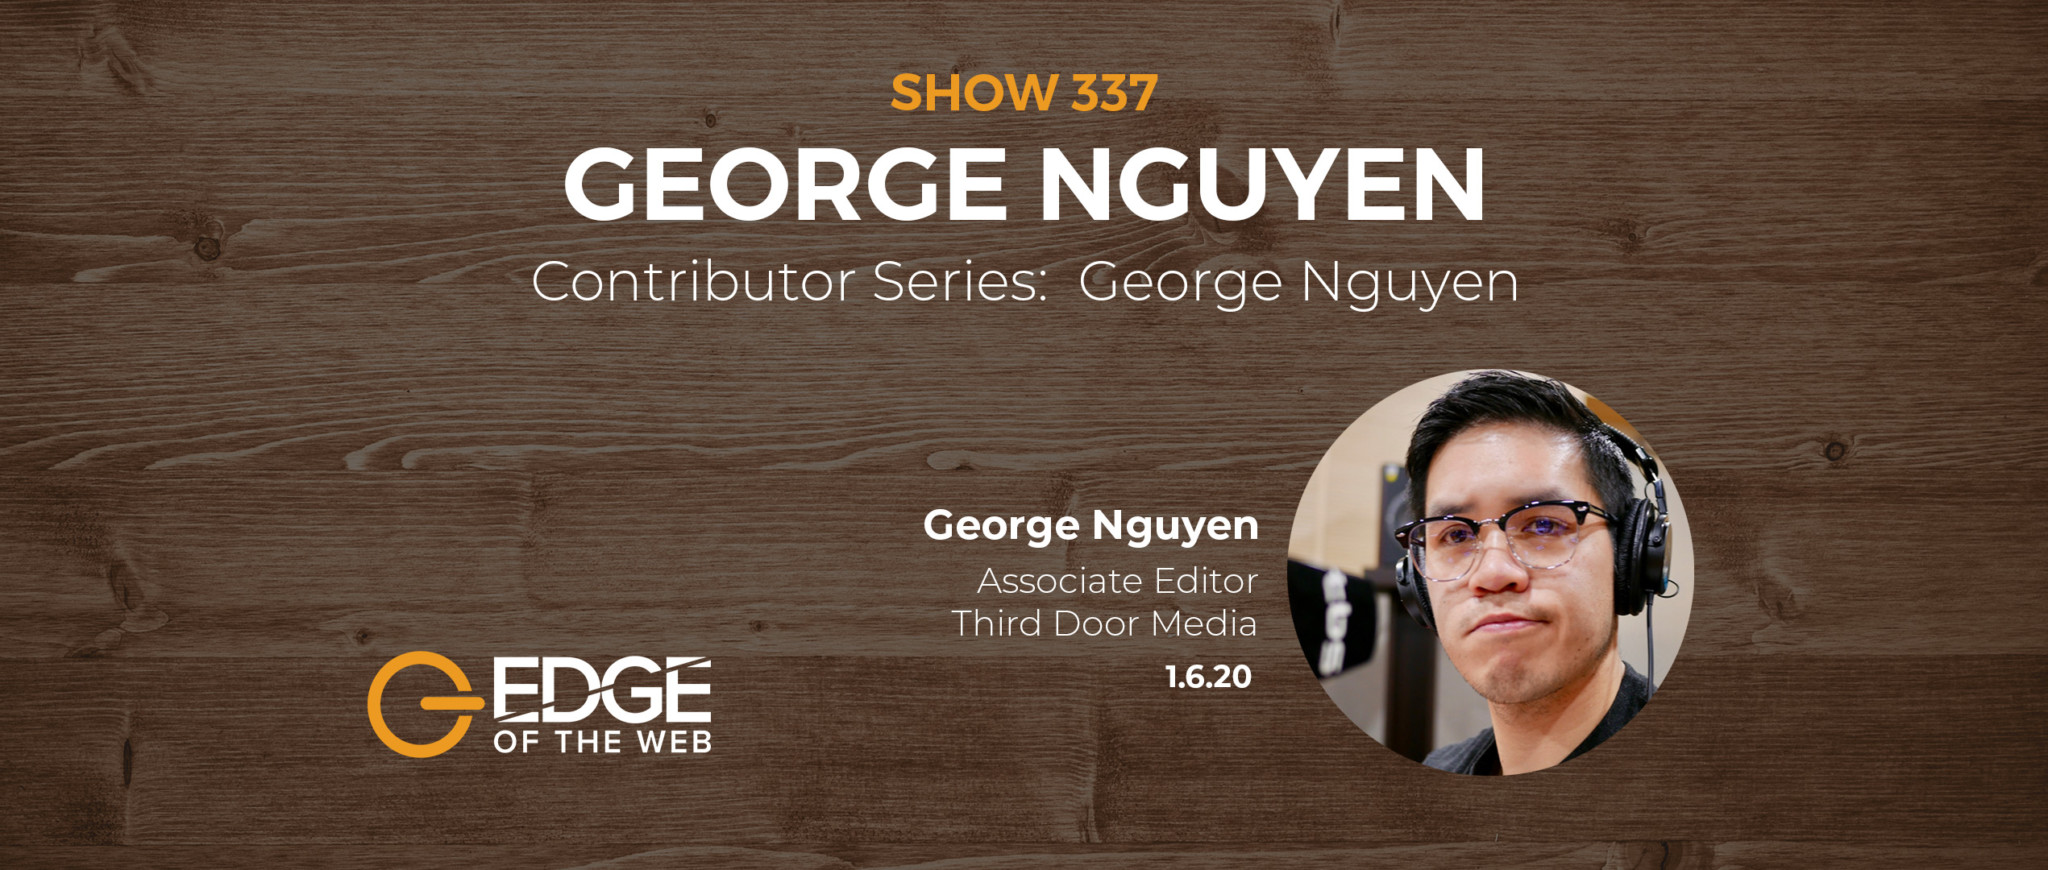 Show 337: Contributor Series: George Nguyen, featuring George Nguyen